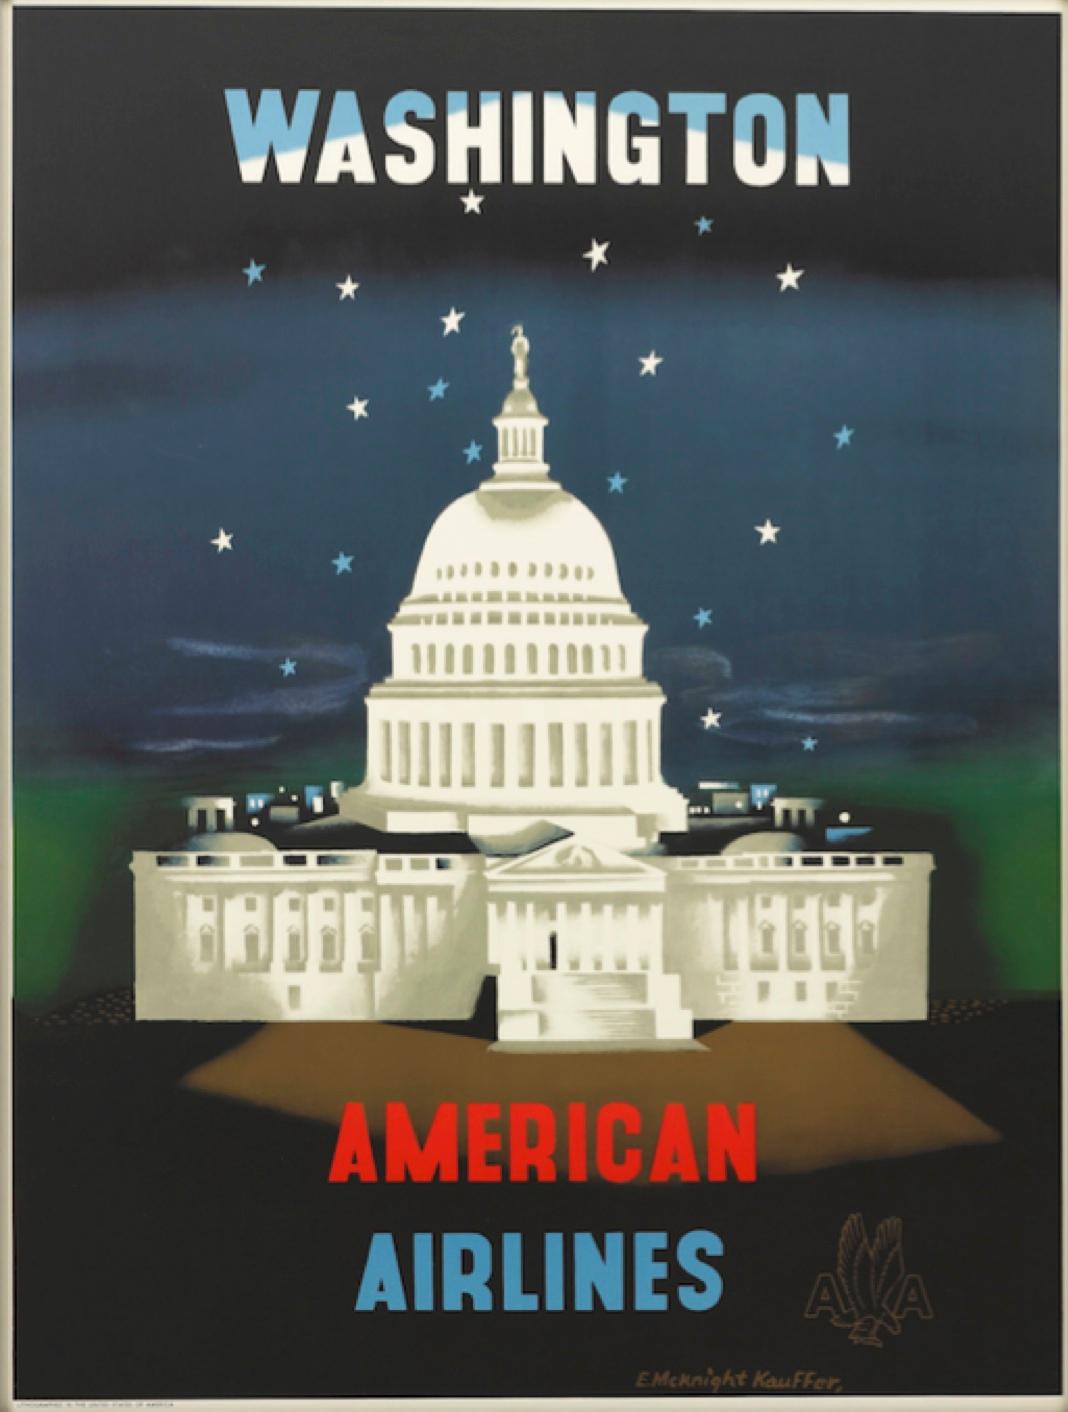 This is an original American Airlines travel poster from 1950 advertising Washington D.C. as one of their alluring destinations. The poster was created by artist E. McKnight Kauffer and boldly displays the U.S. Capitol against a starry sky.

This